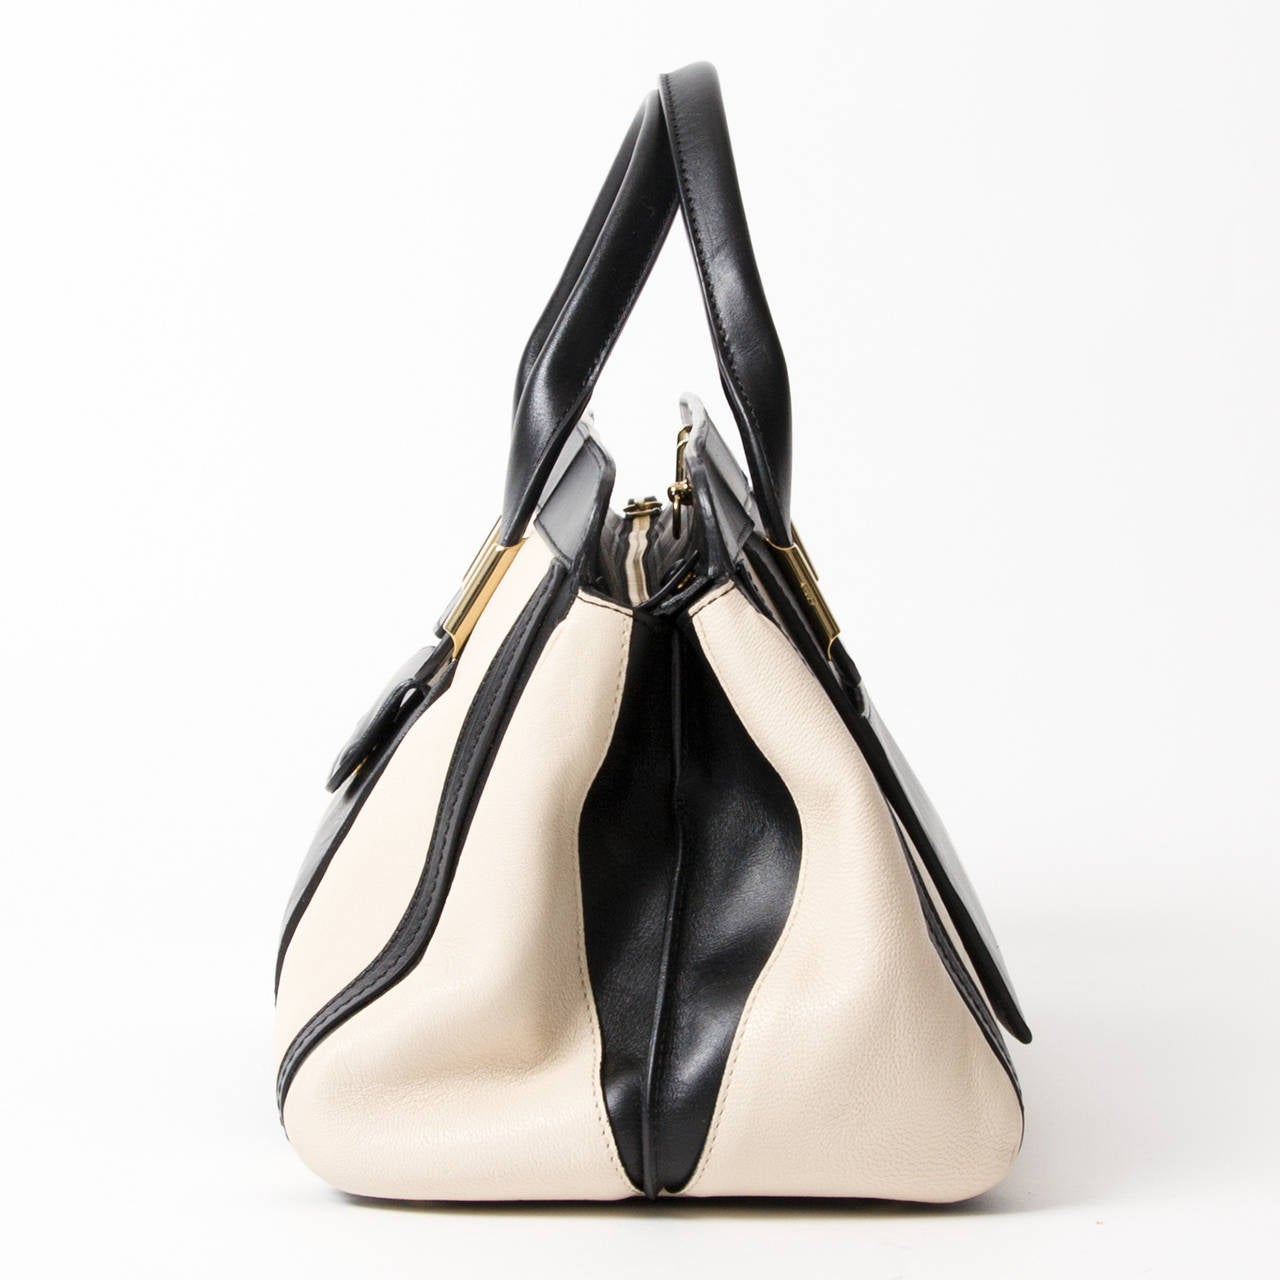 Chloé 'Alice' Leather tote in off-white and black in sheep and calf leather with gold hardware.

Two top handles and zip closure.

Front pocket with snap-fastening.

This bag is a versatile everyday choice.